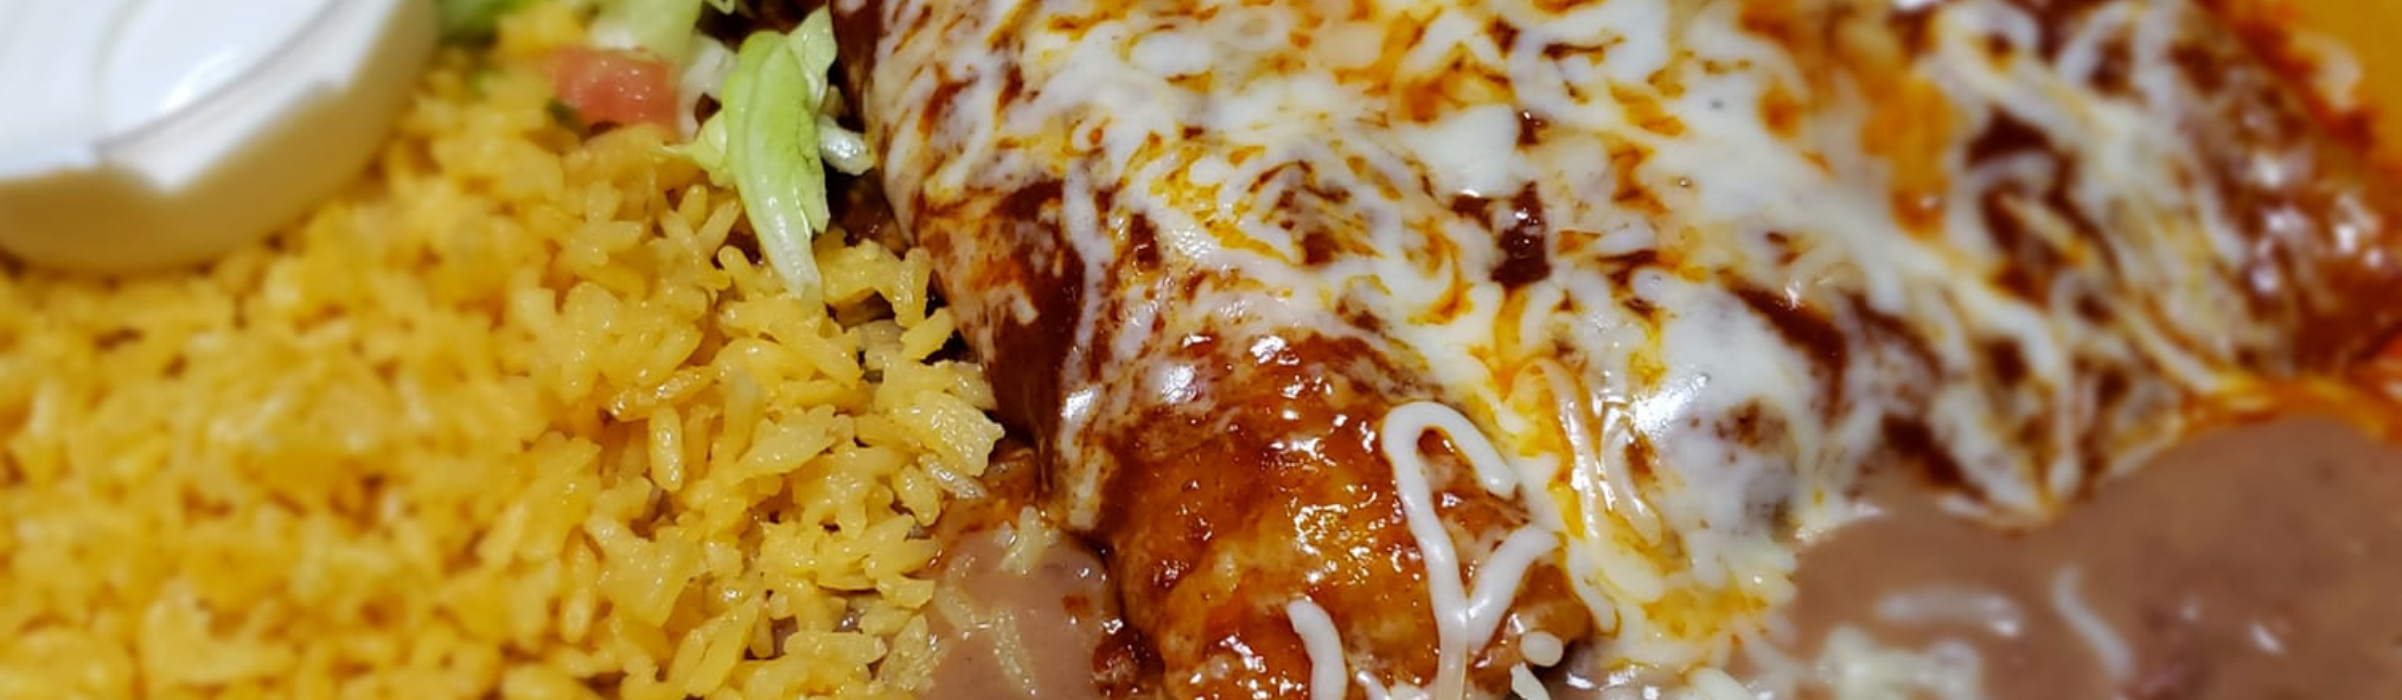 Enchilada dinner with rice and beans